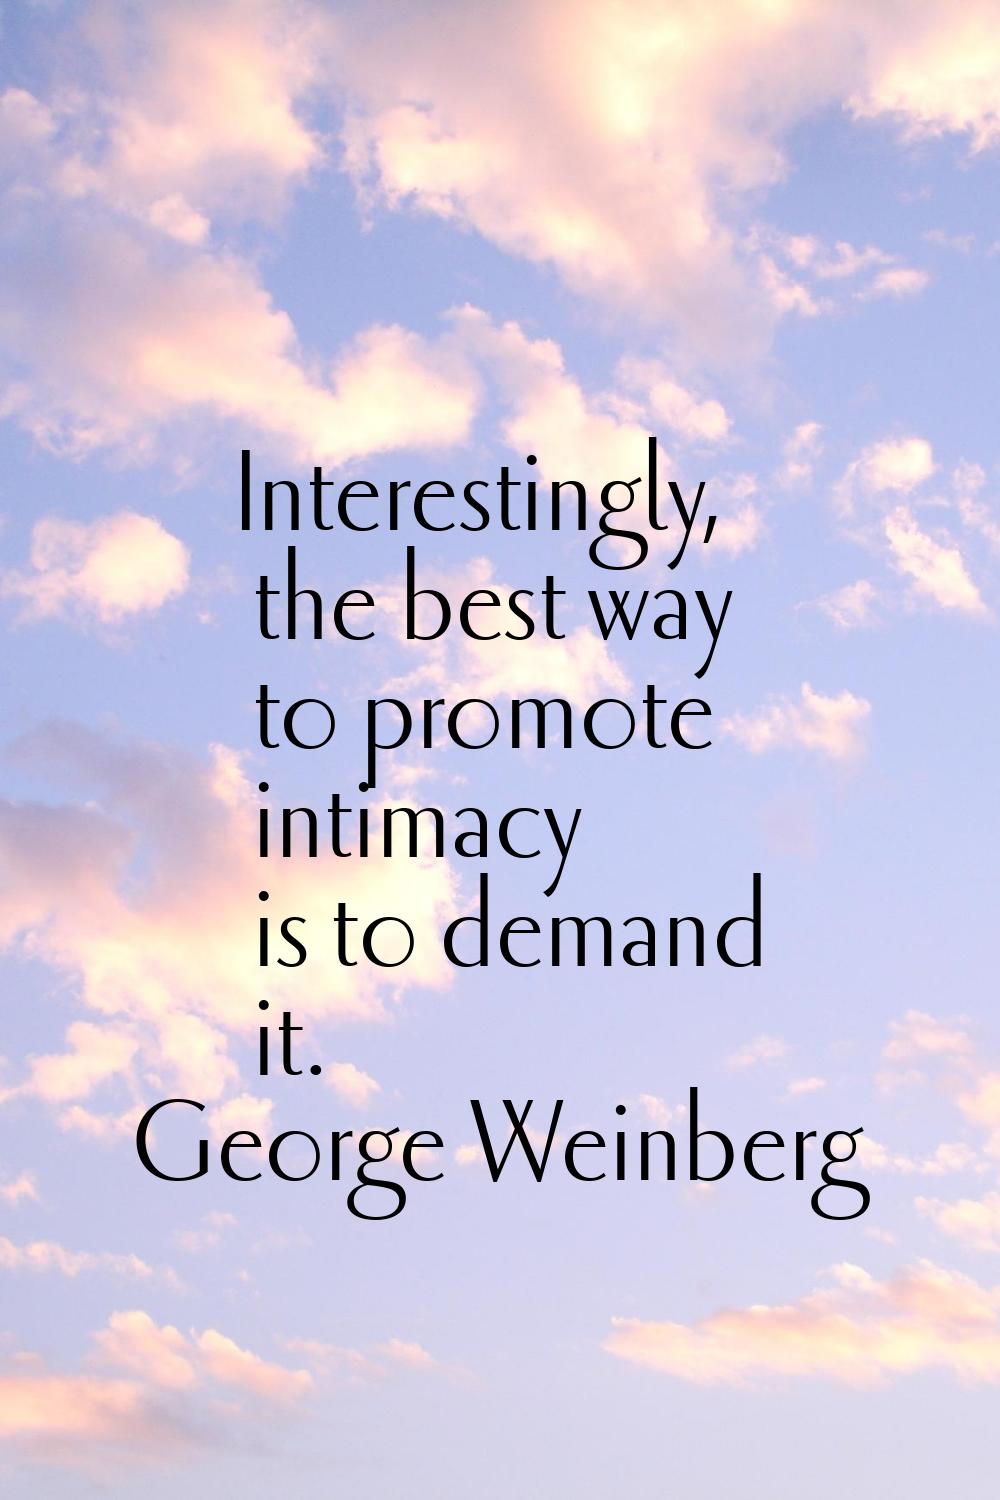 Interestingly, the best way to promote intimacy is to demand it.